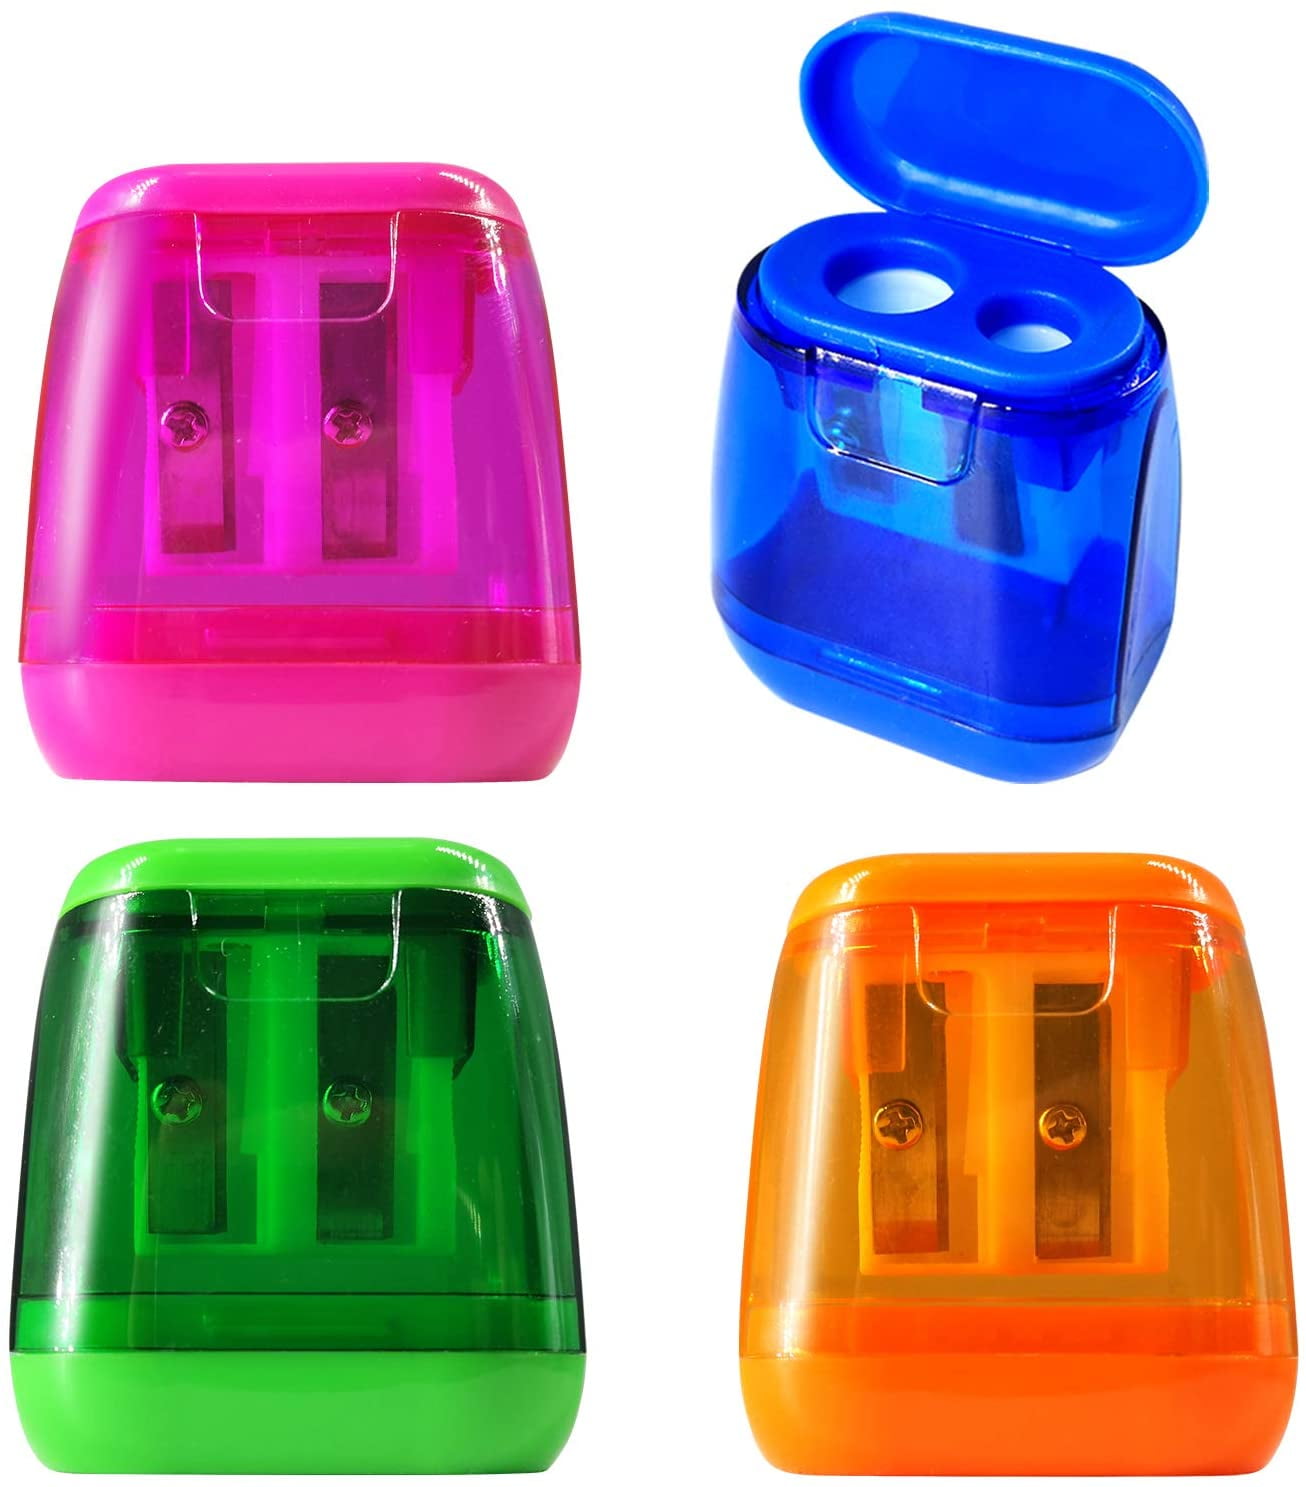 Pencil Sharpener, Manual Pencil Sharpeners, 4Pcs Colorful Compact Dual  Holes Pencil Sharpeners With Lid, Colored Pencil Sharpener For Kids &  Adults